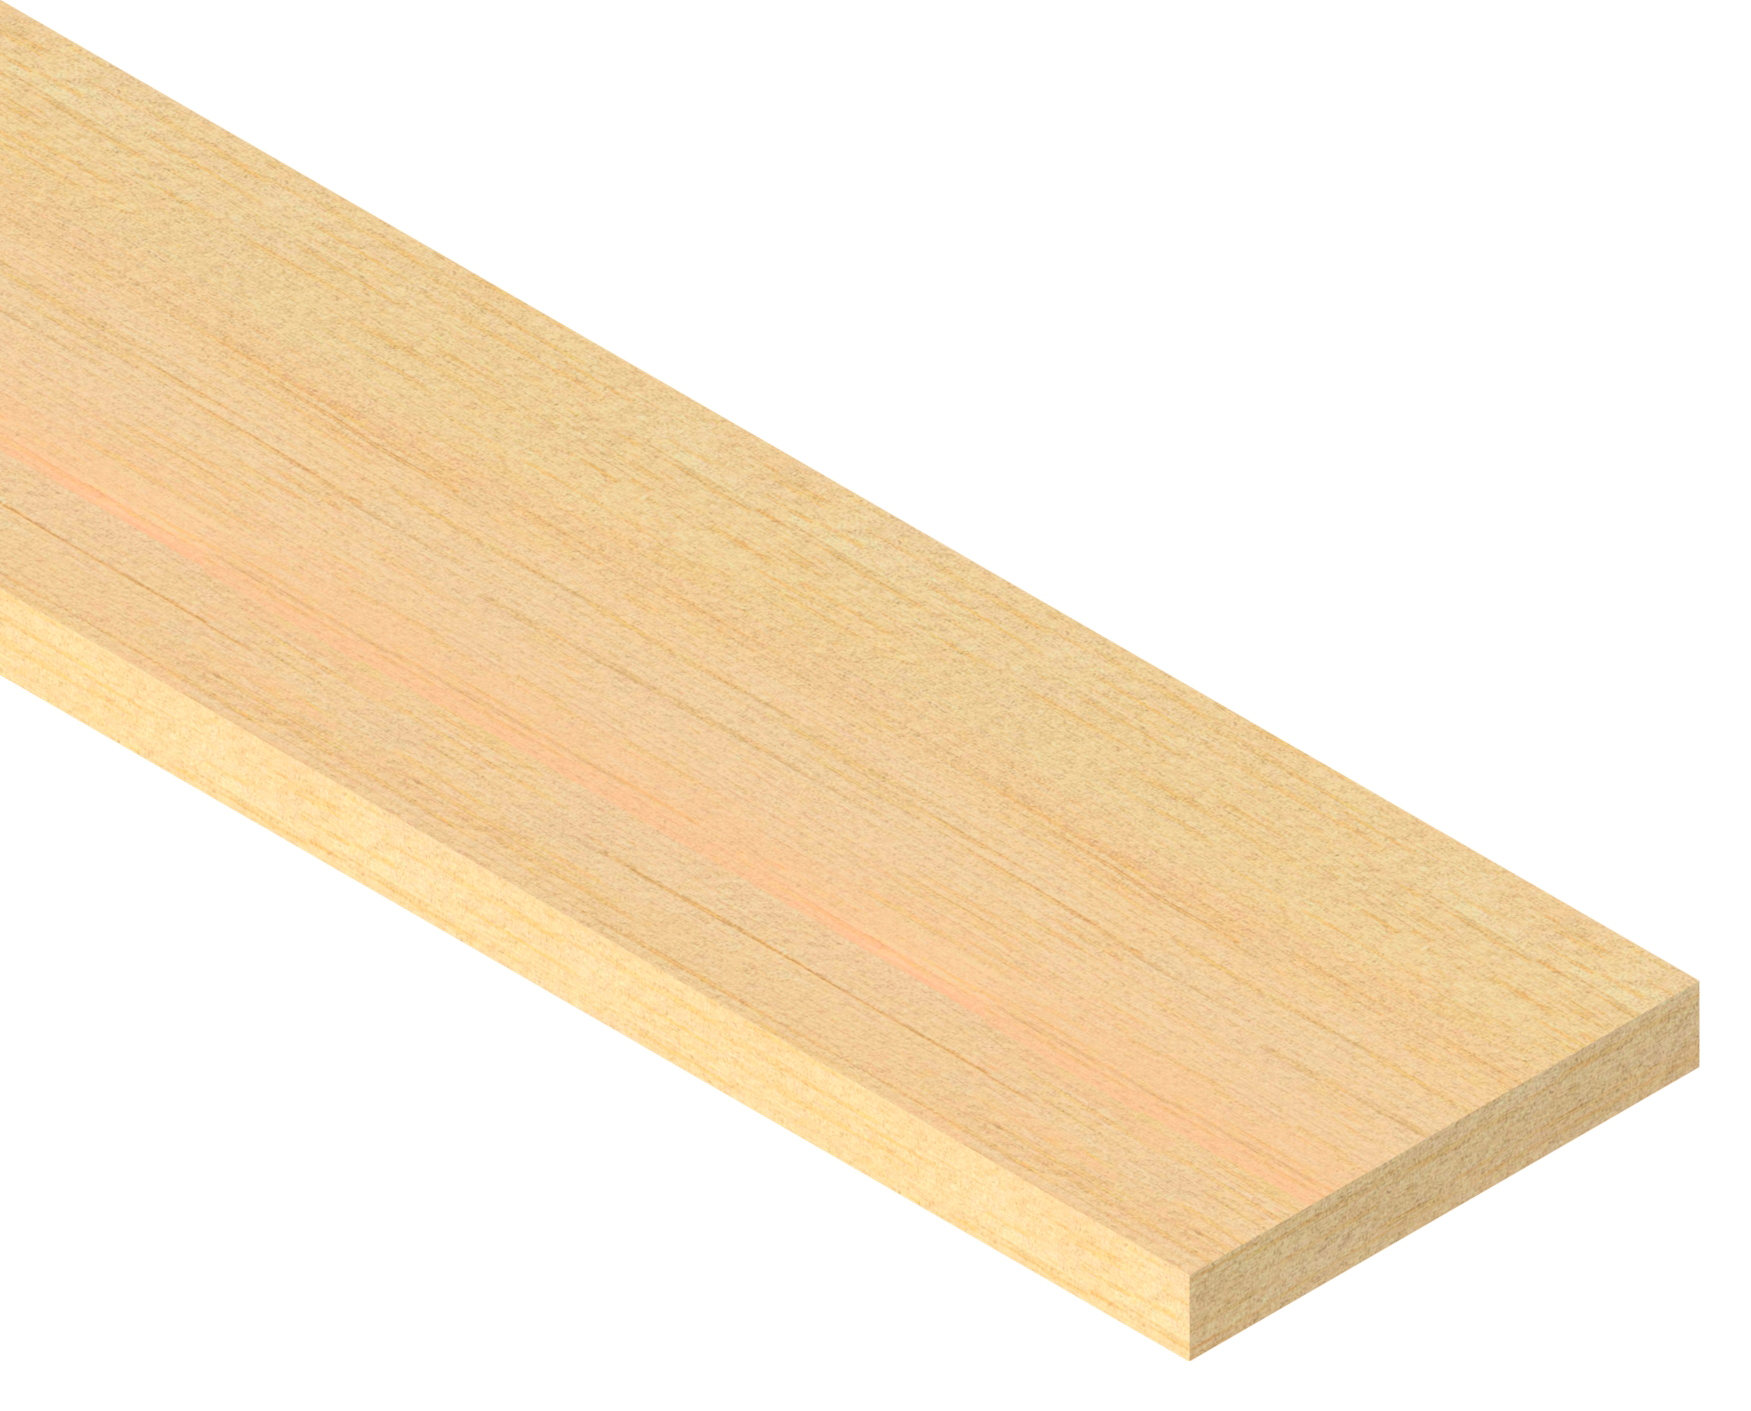 Image of Cheshire Mouldings Pine Stripwood - 10 x 68 x 900mm